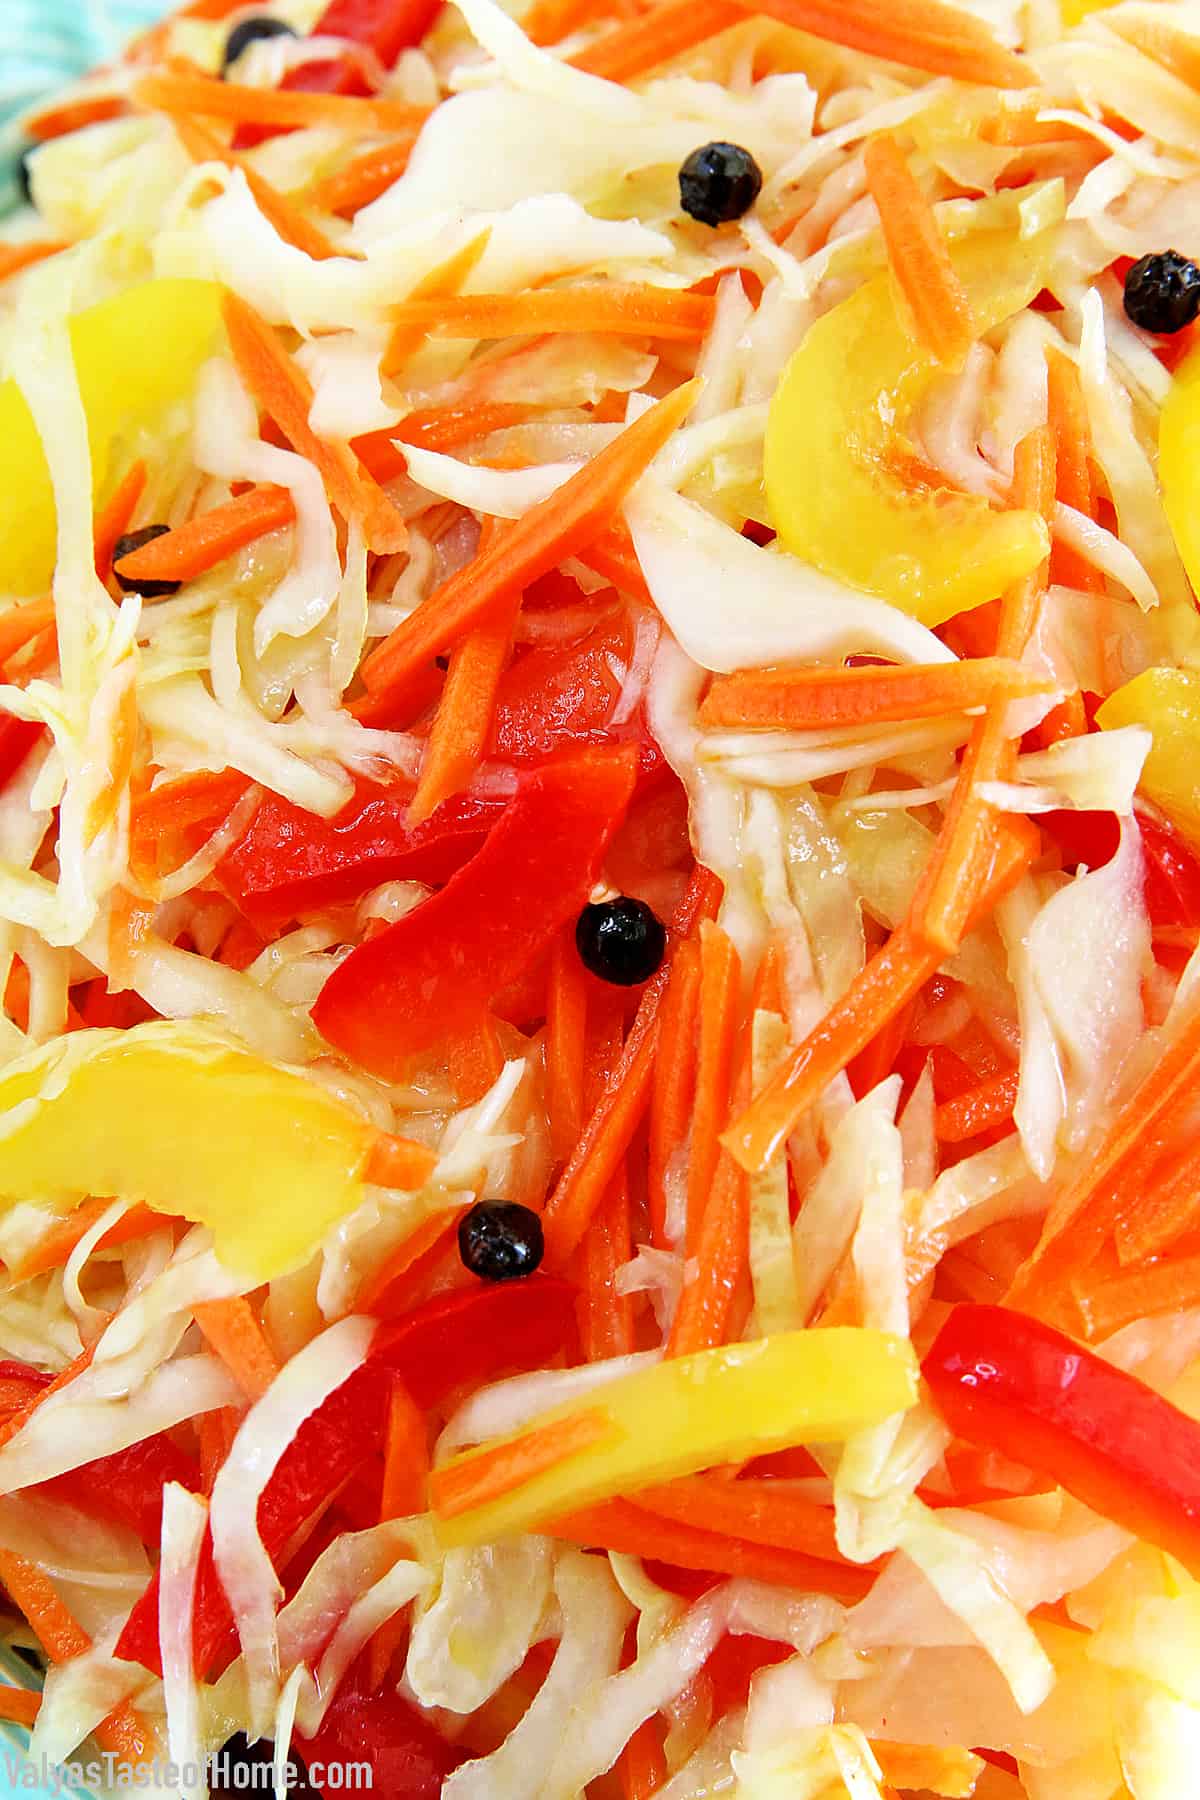 This Cabbage Carrots and Peppers Salad recipe is not one of those salads that you really taste the sharpness of fresh vegetables. It tastes more like a marinated salad and has a bit of a sweet and sour taste to it. The best thing I like about this salad is that you can make it ahead of time which helps avoid those last-minute preparation rushes.  #cabbagecarrotspepperssalad #marinatedsalad #easymarinatedvegetablesalad #valyastasteofhome